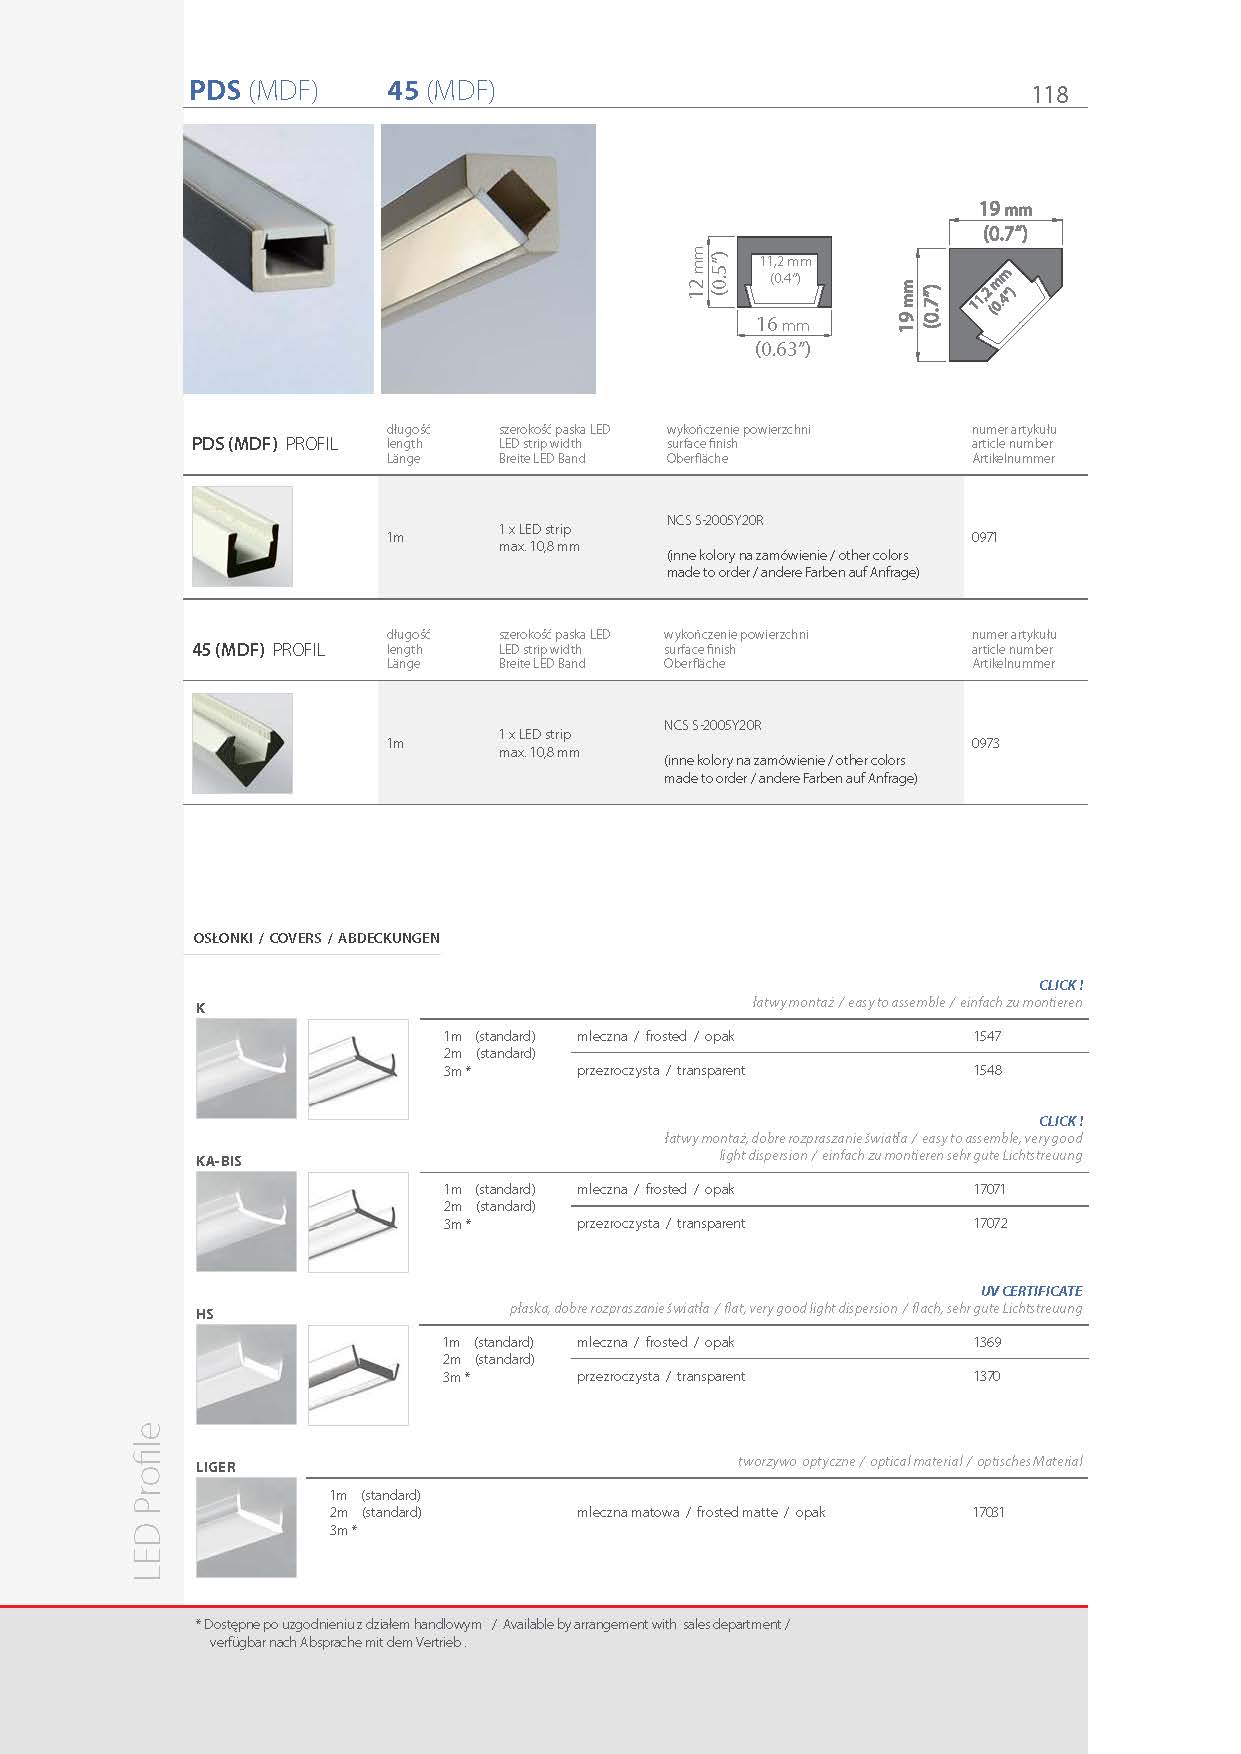 PDS-MDF, profile | stair-lighting.com, 0971 profile, PDS-MDF klus profile, PDS-MDF channel, 